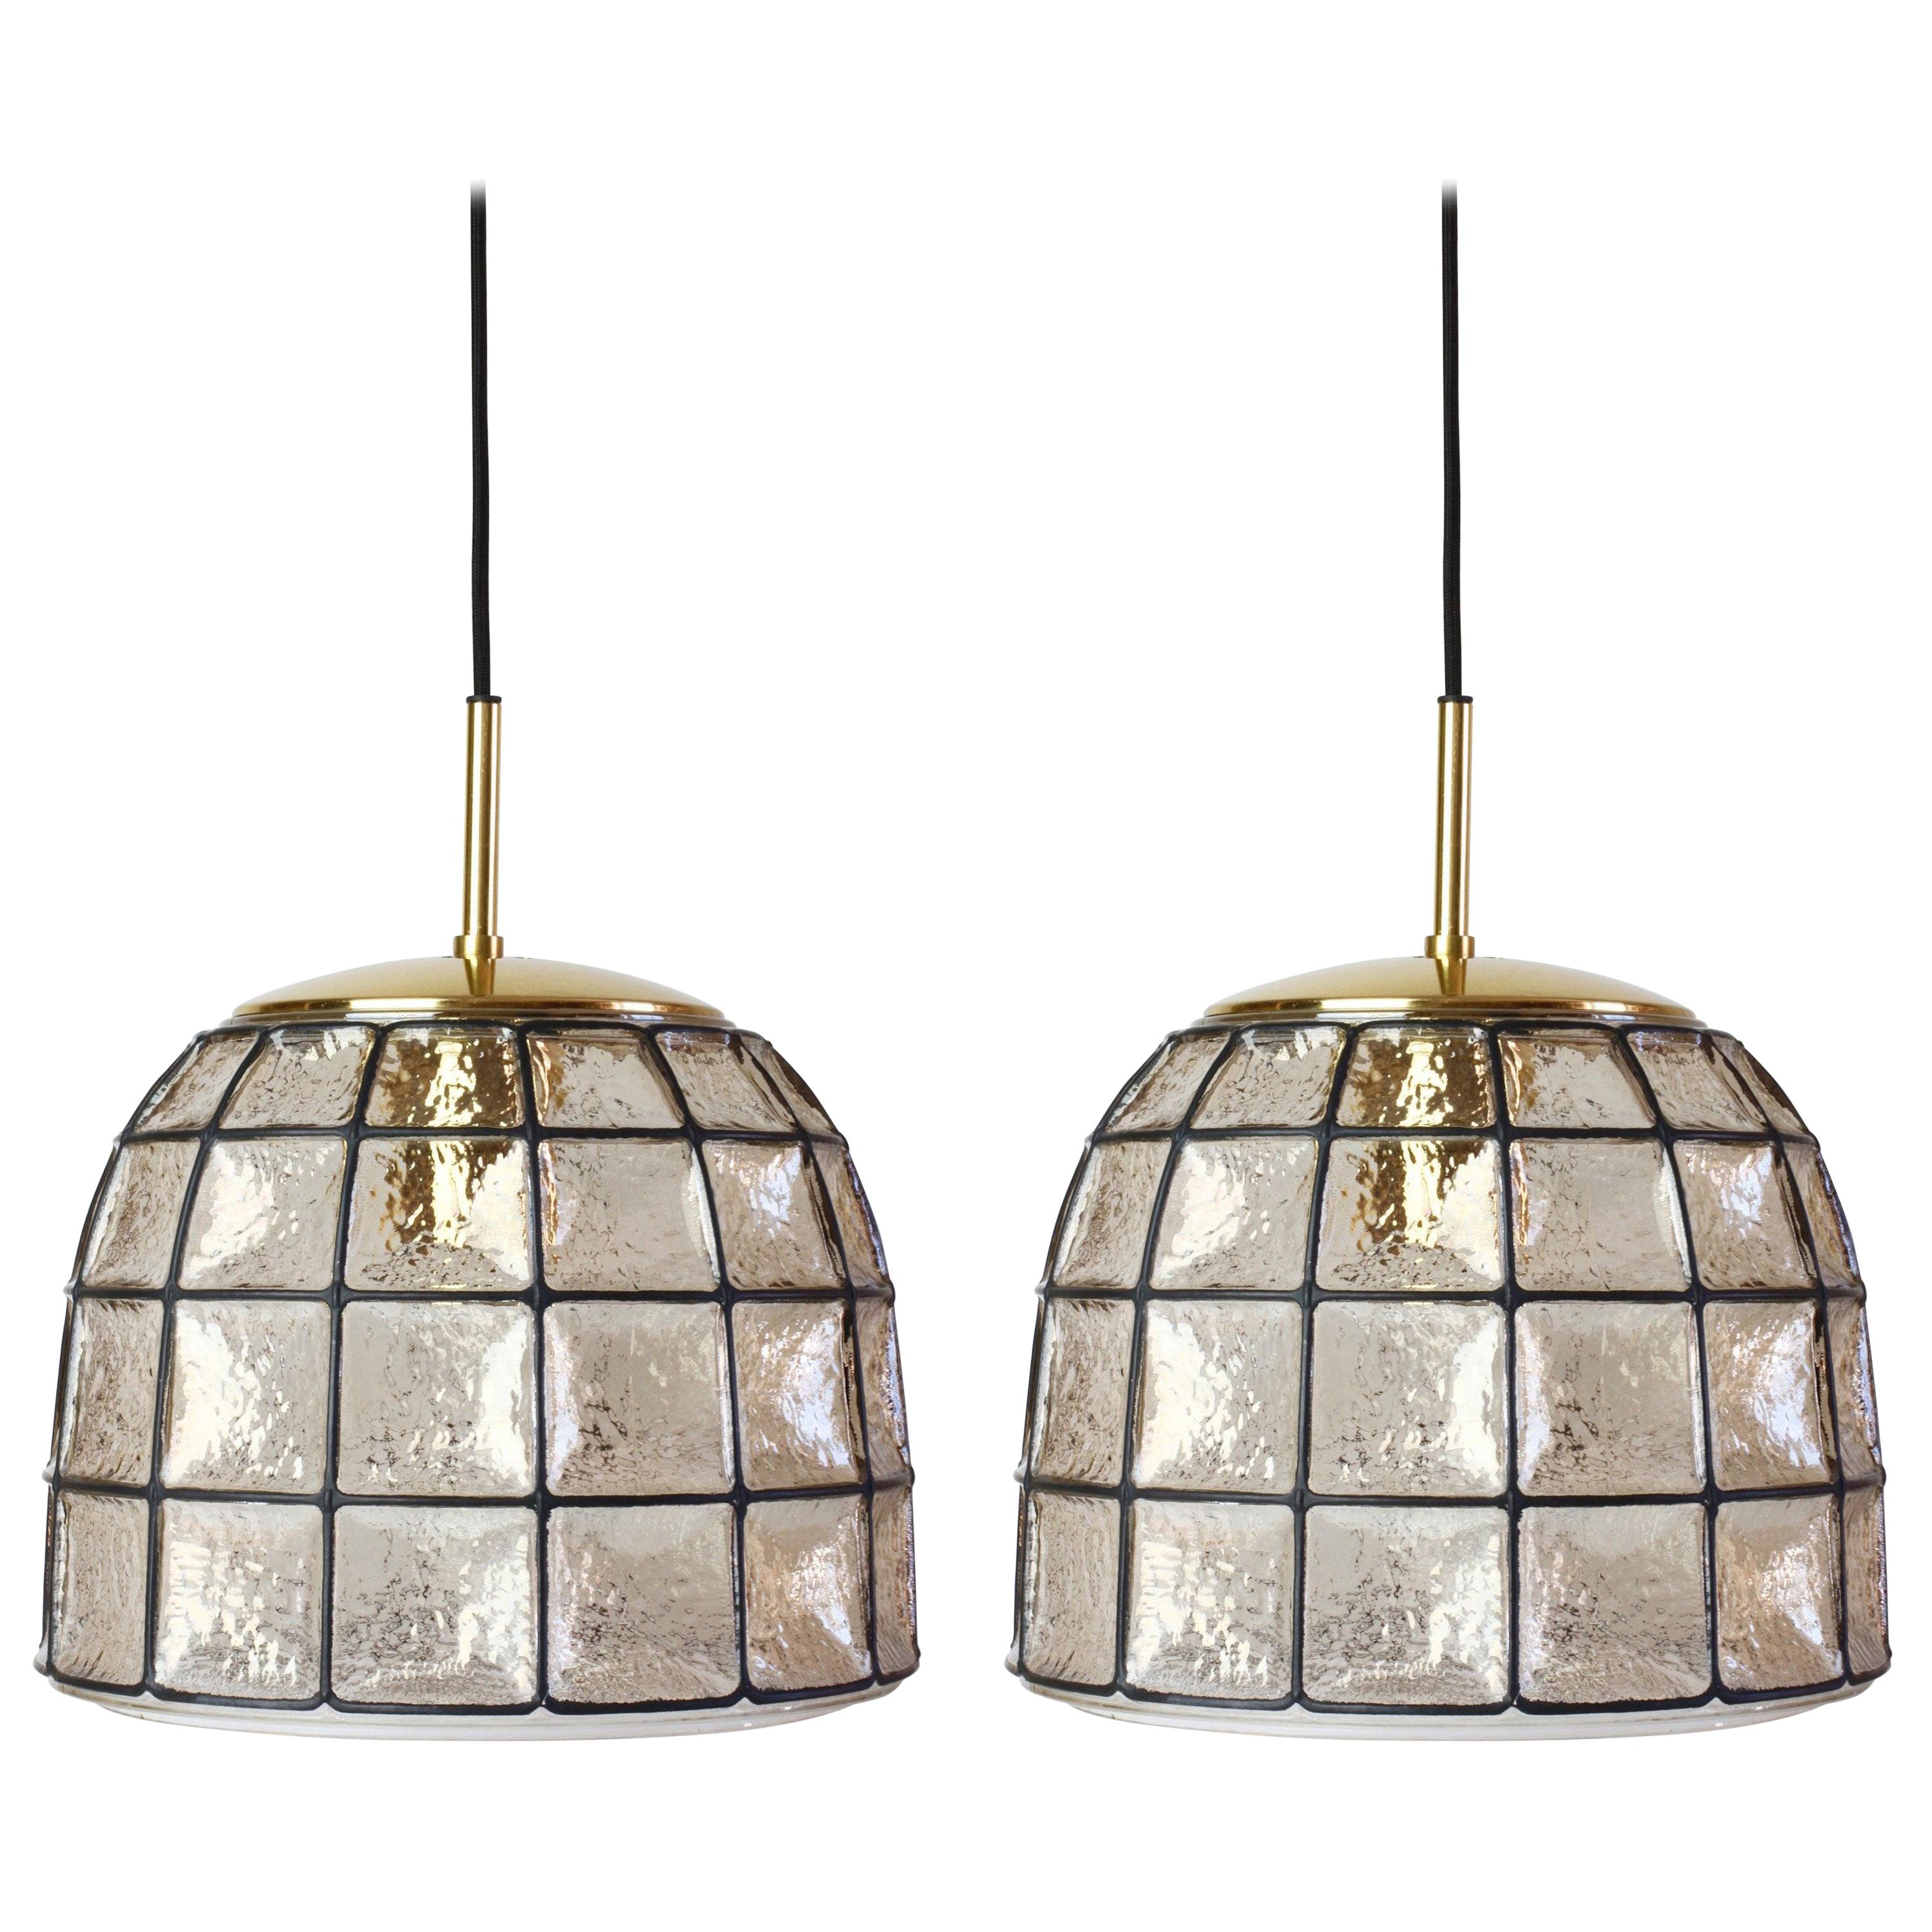 One of a Pair 1960s Black Iron & Glass Honeycomb Bell Pendant Lights by Limburg